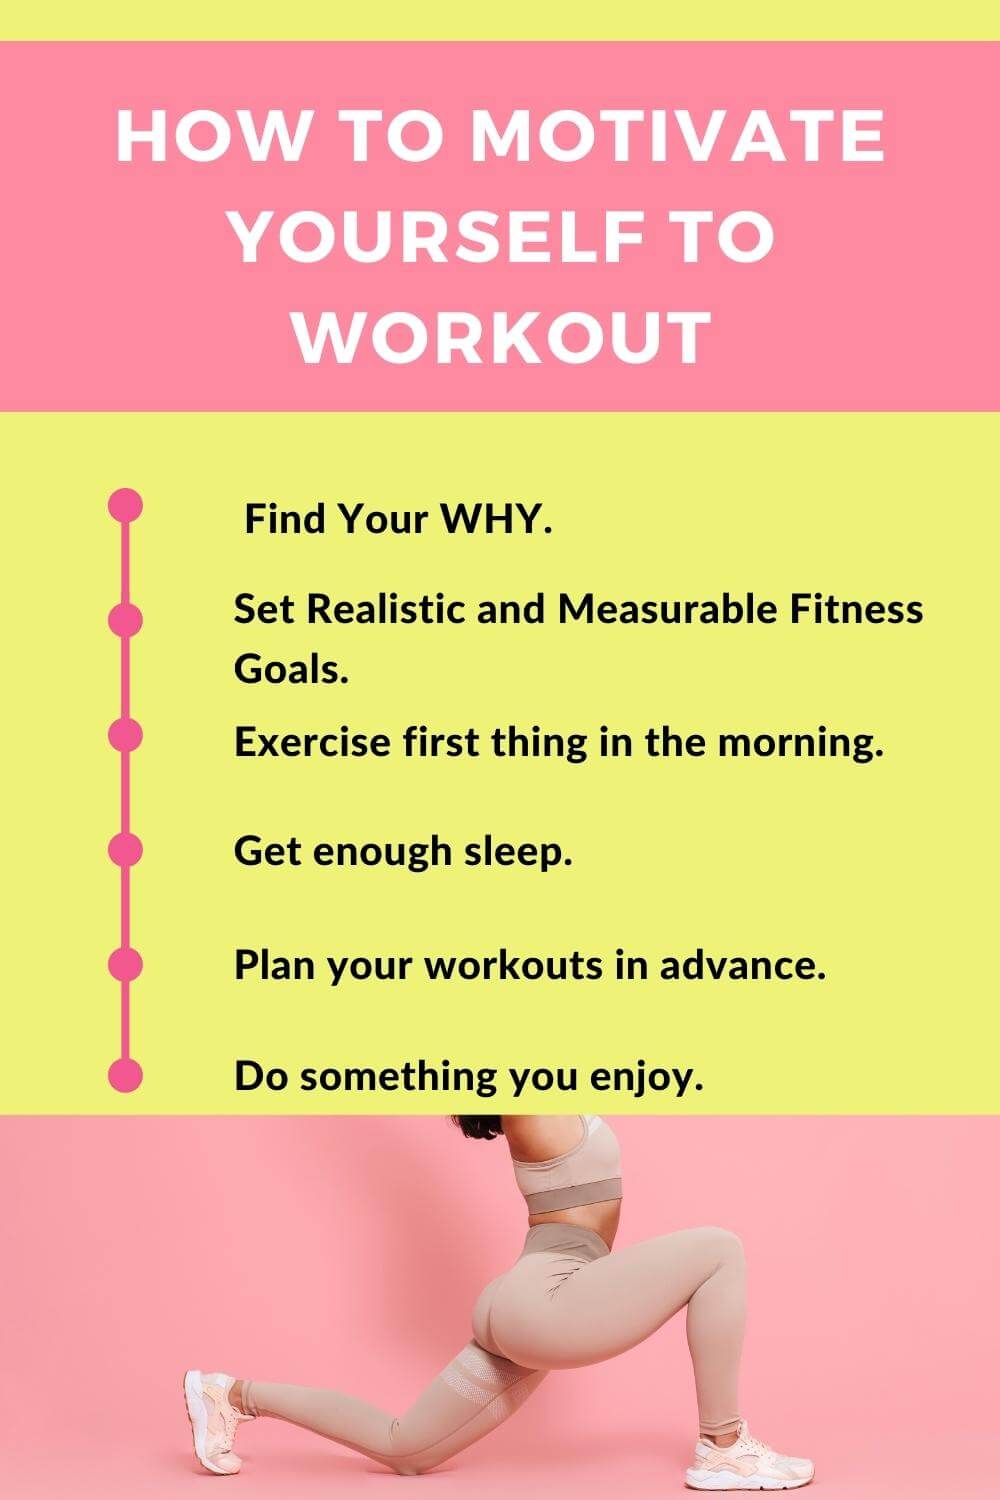 How to Motivate Yourself to Work Out [7 Powerful Tips That Work]